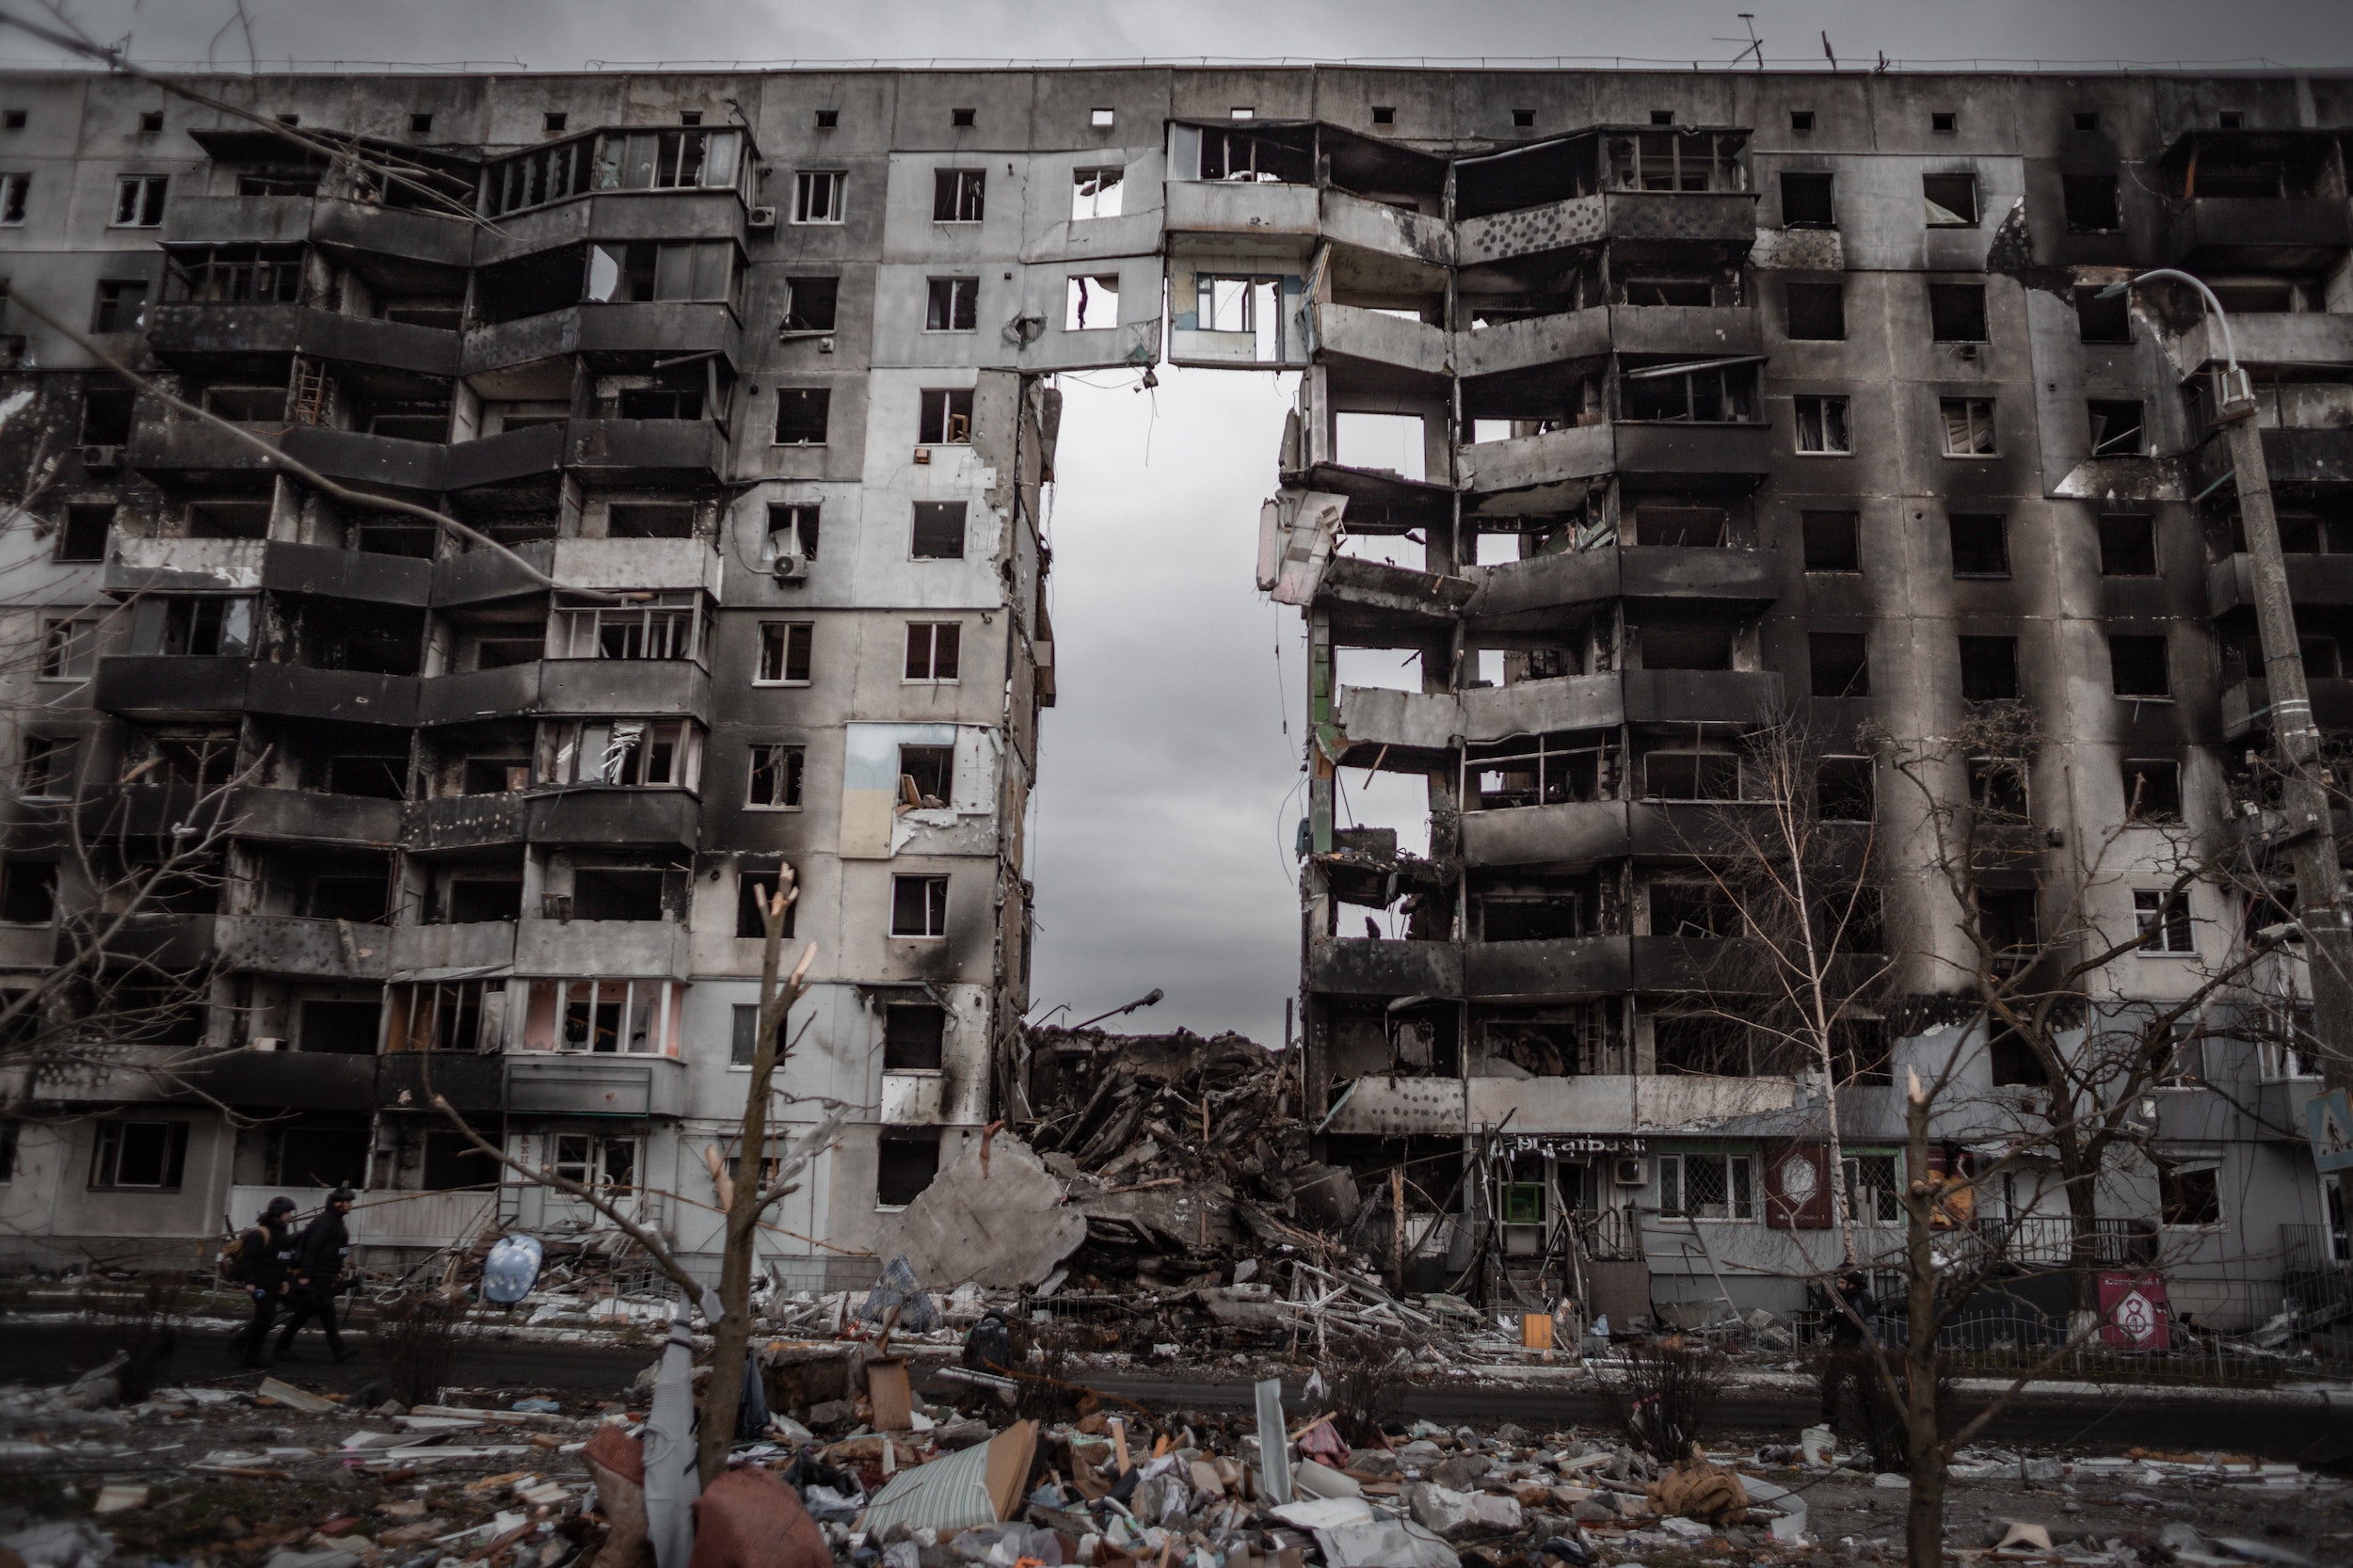 The post-disaster reconstruction challenges in an unstable world